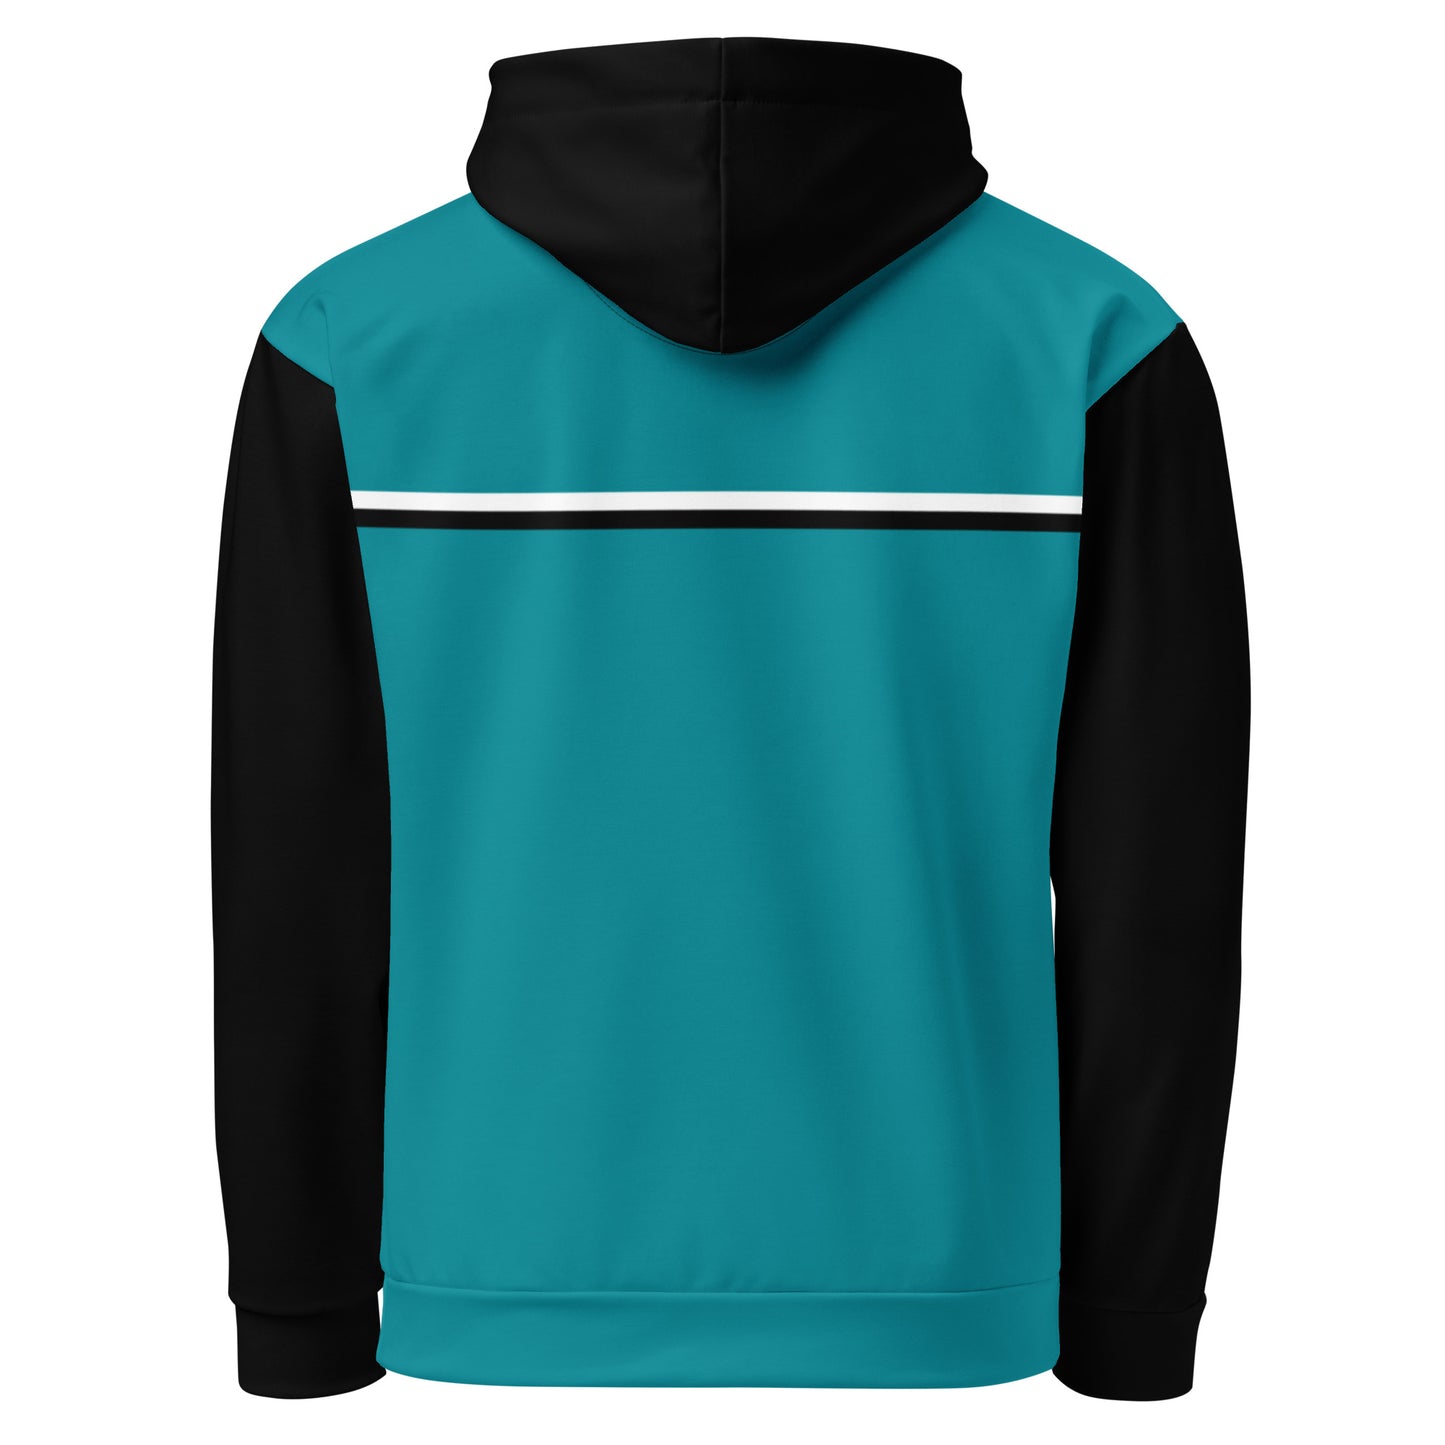 SVOLTA Stripes and Bolts Unisex Color Block Hoodie in Black & Teal, XS-XL - Teen to Adult